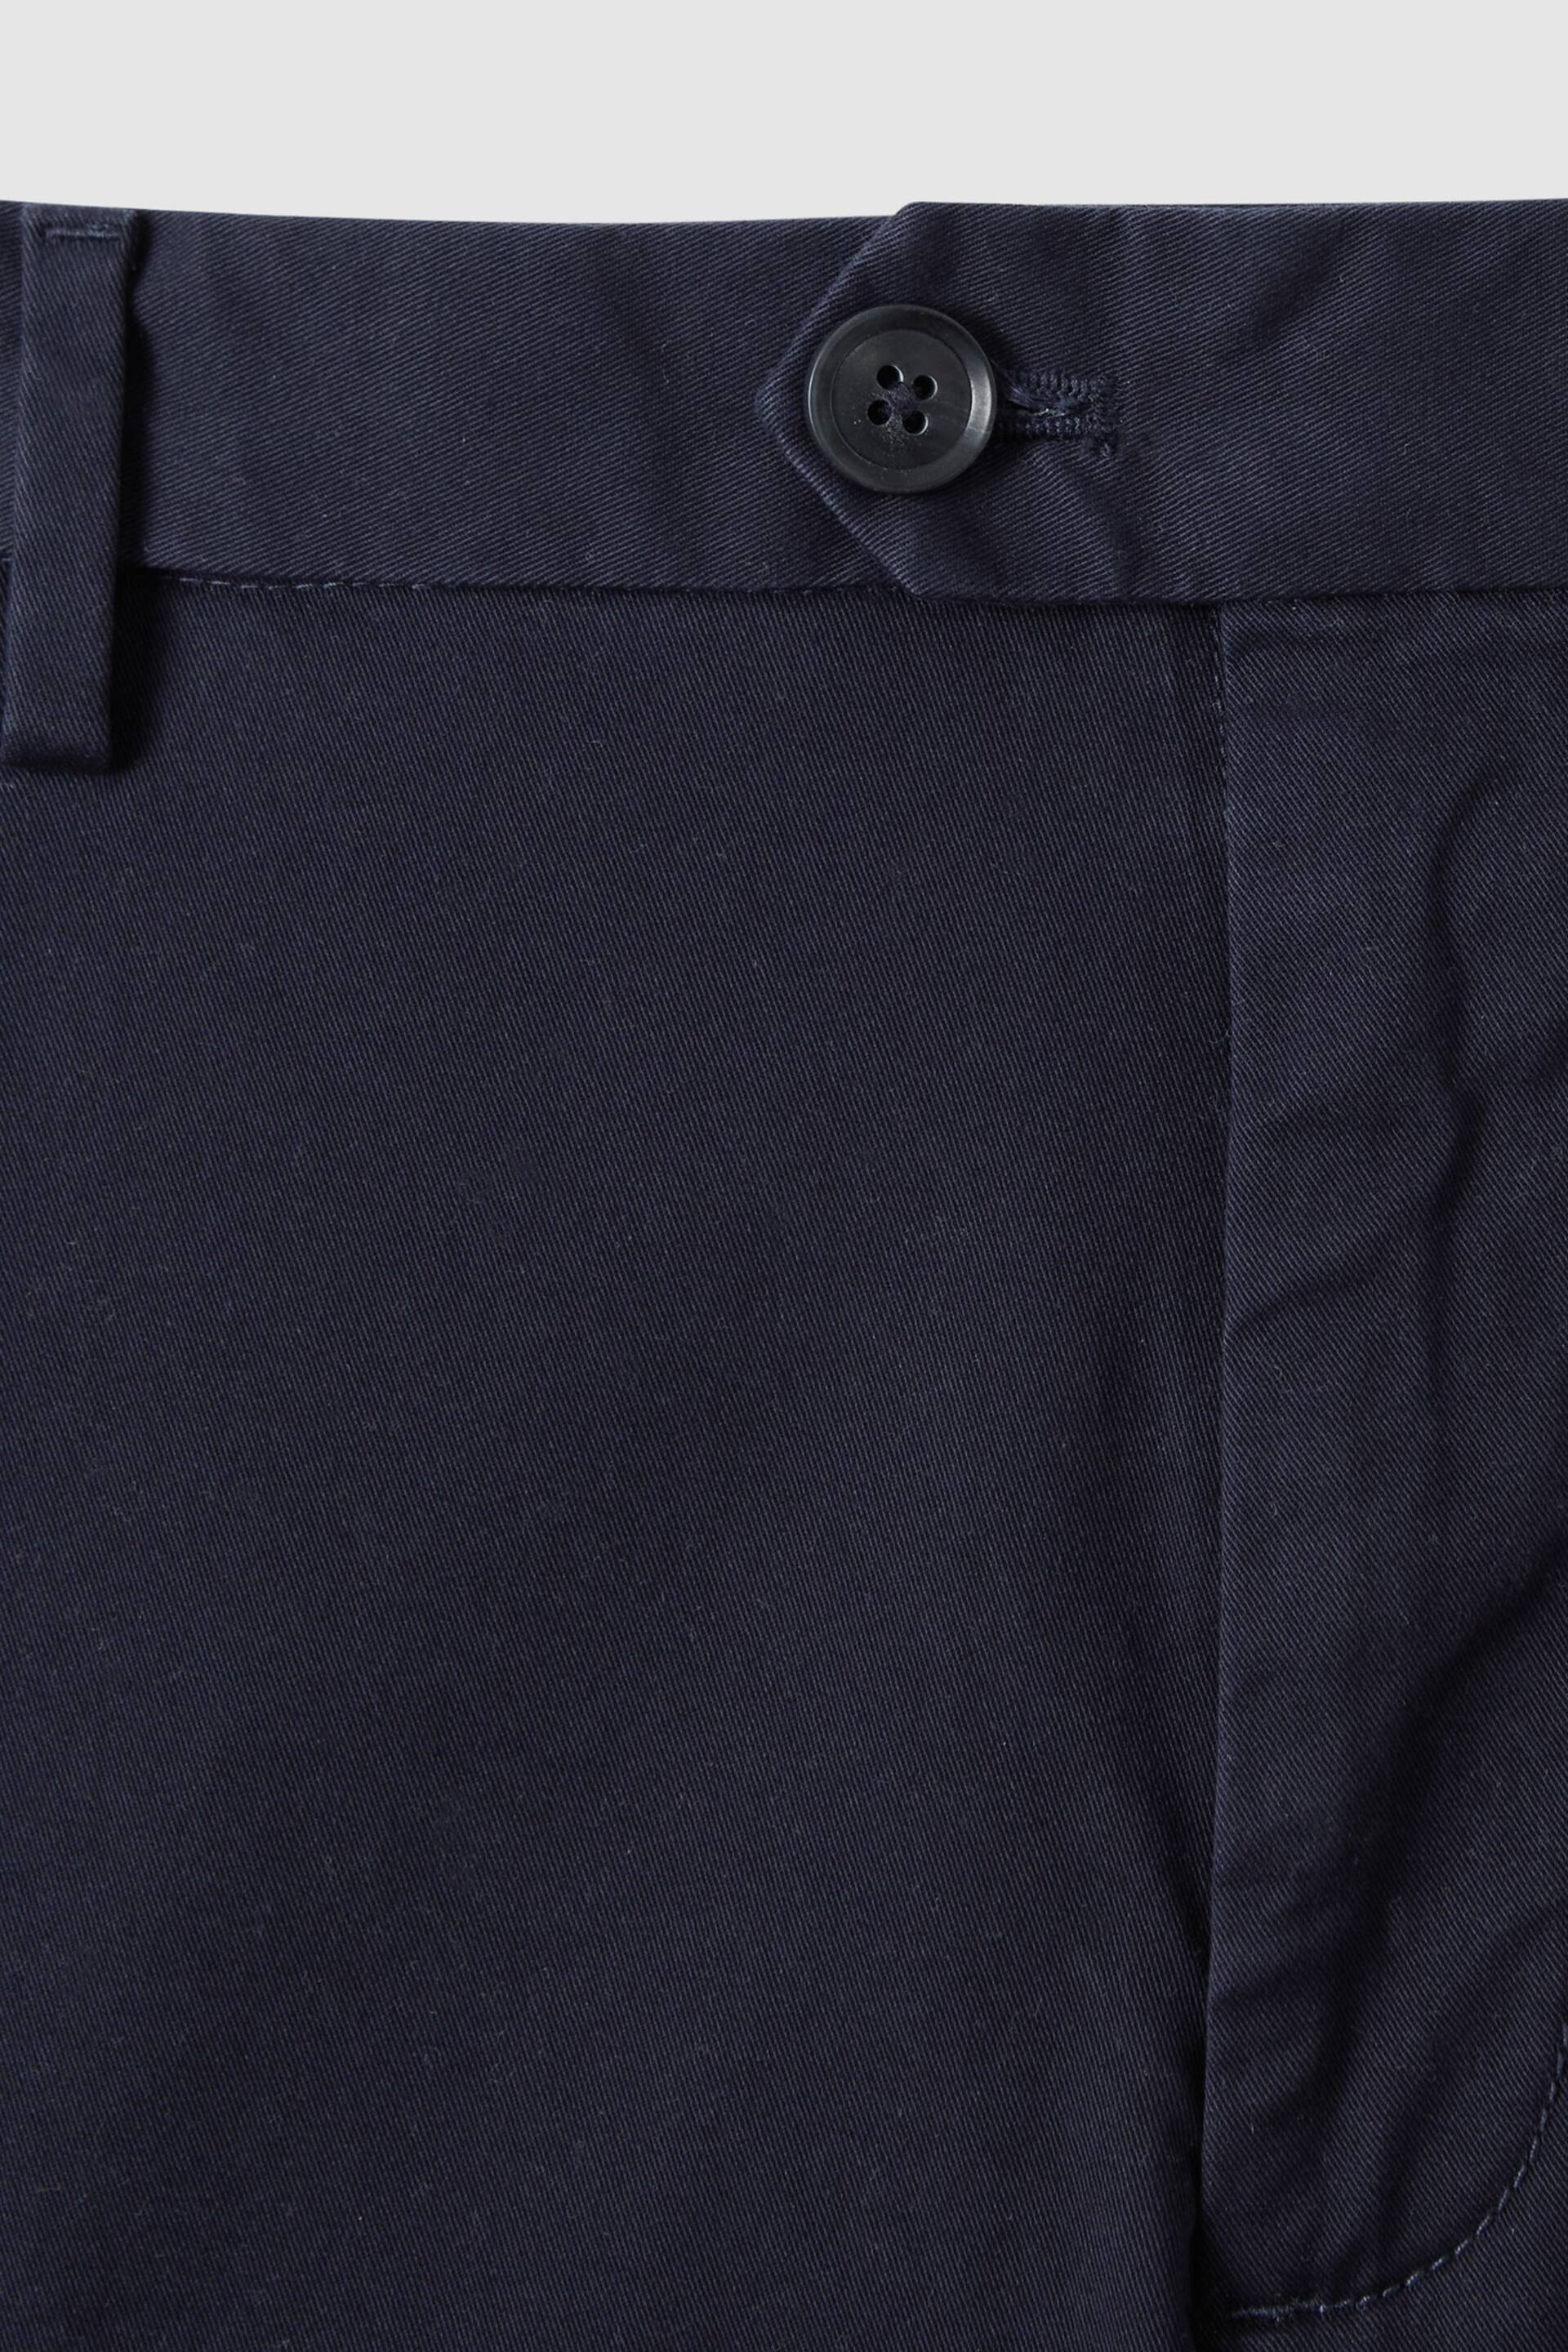 Reiss Navy Wicket Modern Fit Cotton Blend Chino Shorts - Image 6 of 6